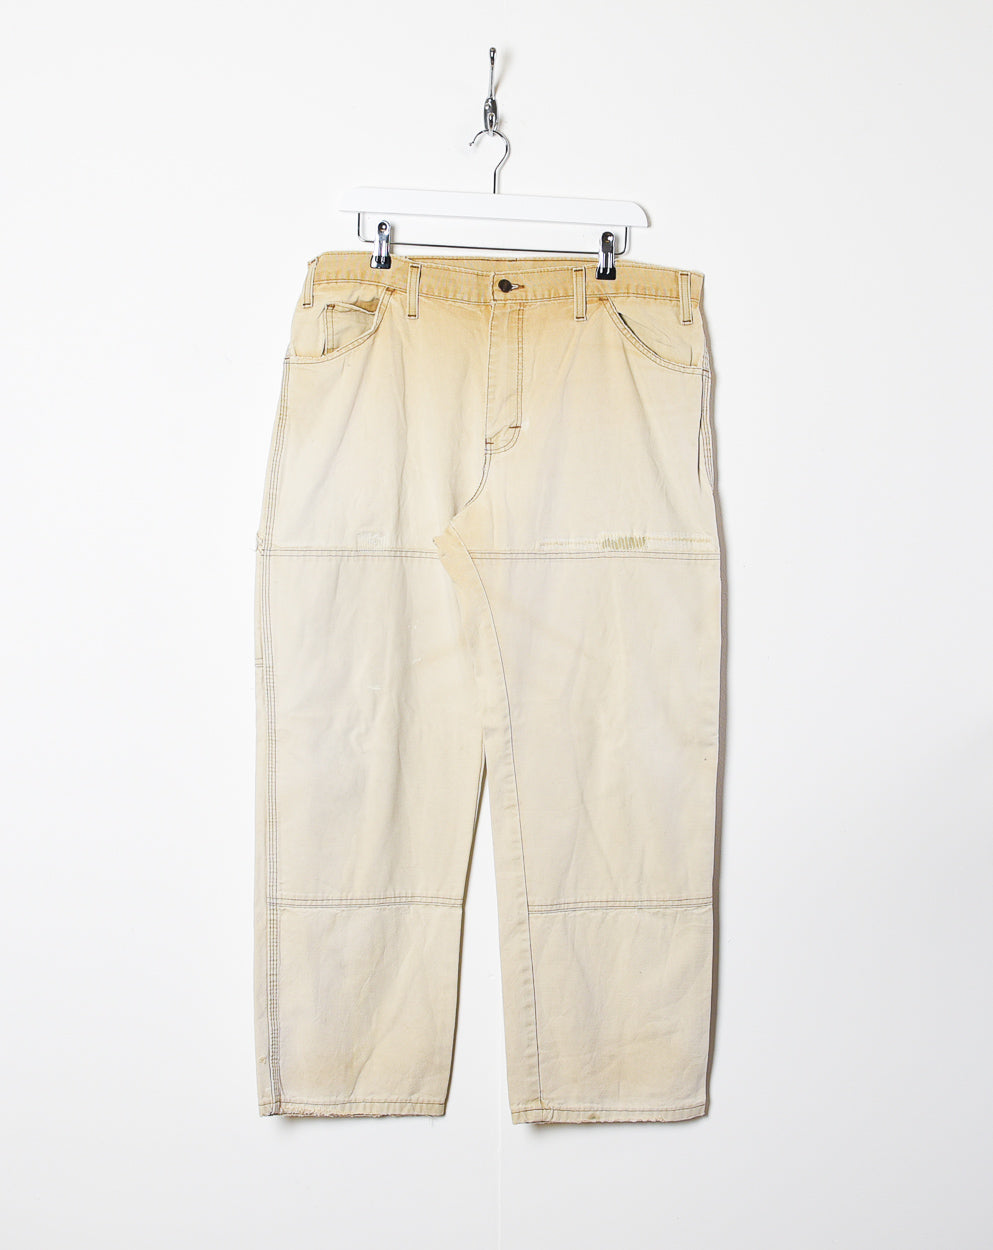 Neutral Dickies Double Knee Carpenter Jeans - W36 L30